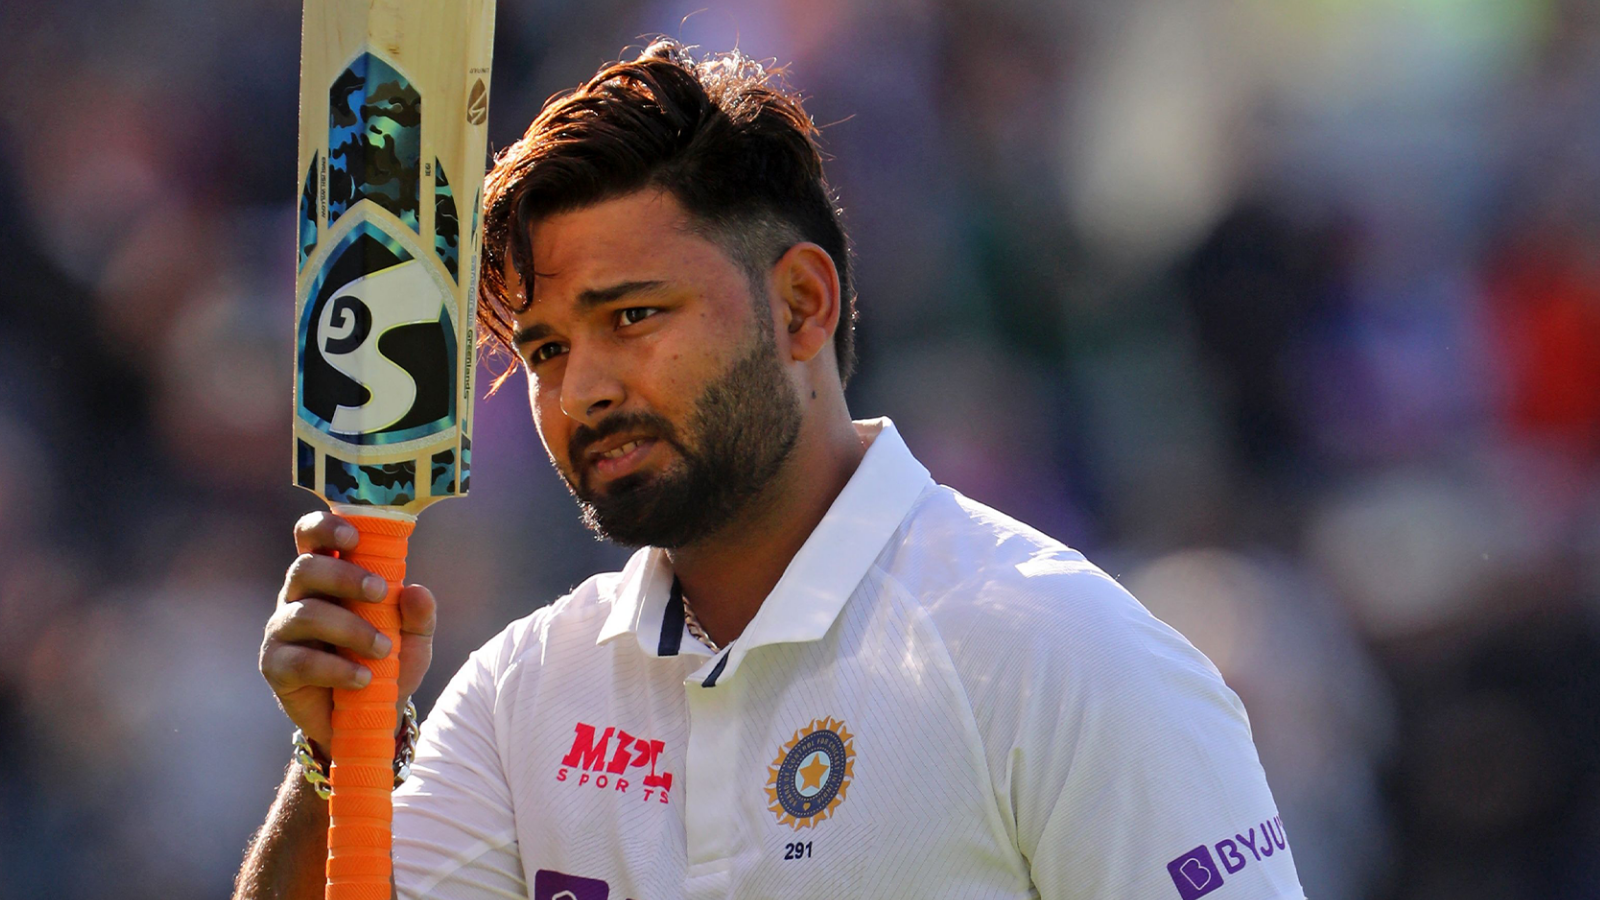 Rishabh Pant Badly Injured in Car Accident: Anil Kumble and Cricket Fans  Wish Speedy Recovery After Accident Photos Go Viral | 🏏 LatestLY